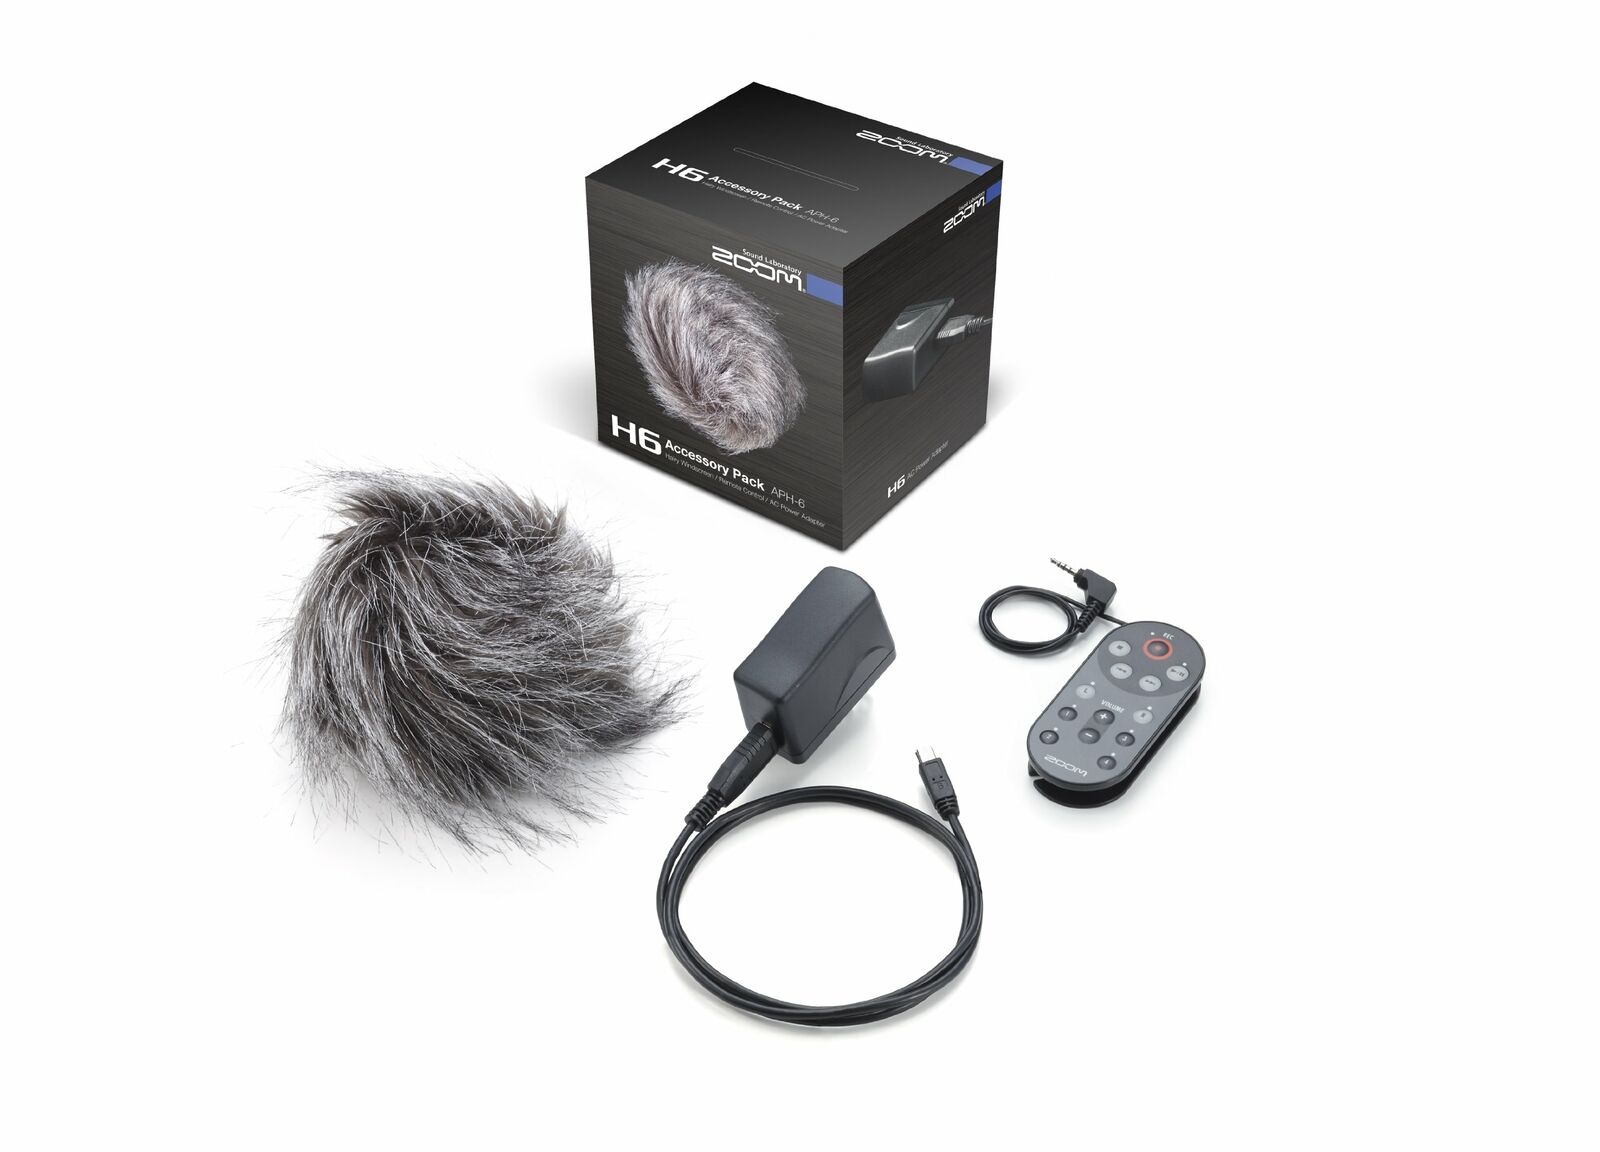 Zoom APH-6 Accessory Pack for H6. Available Now for $39.99